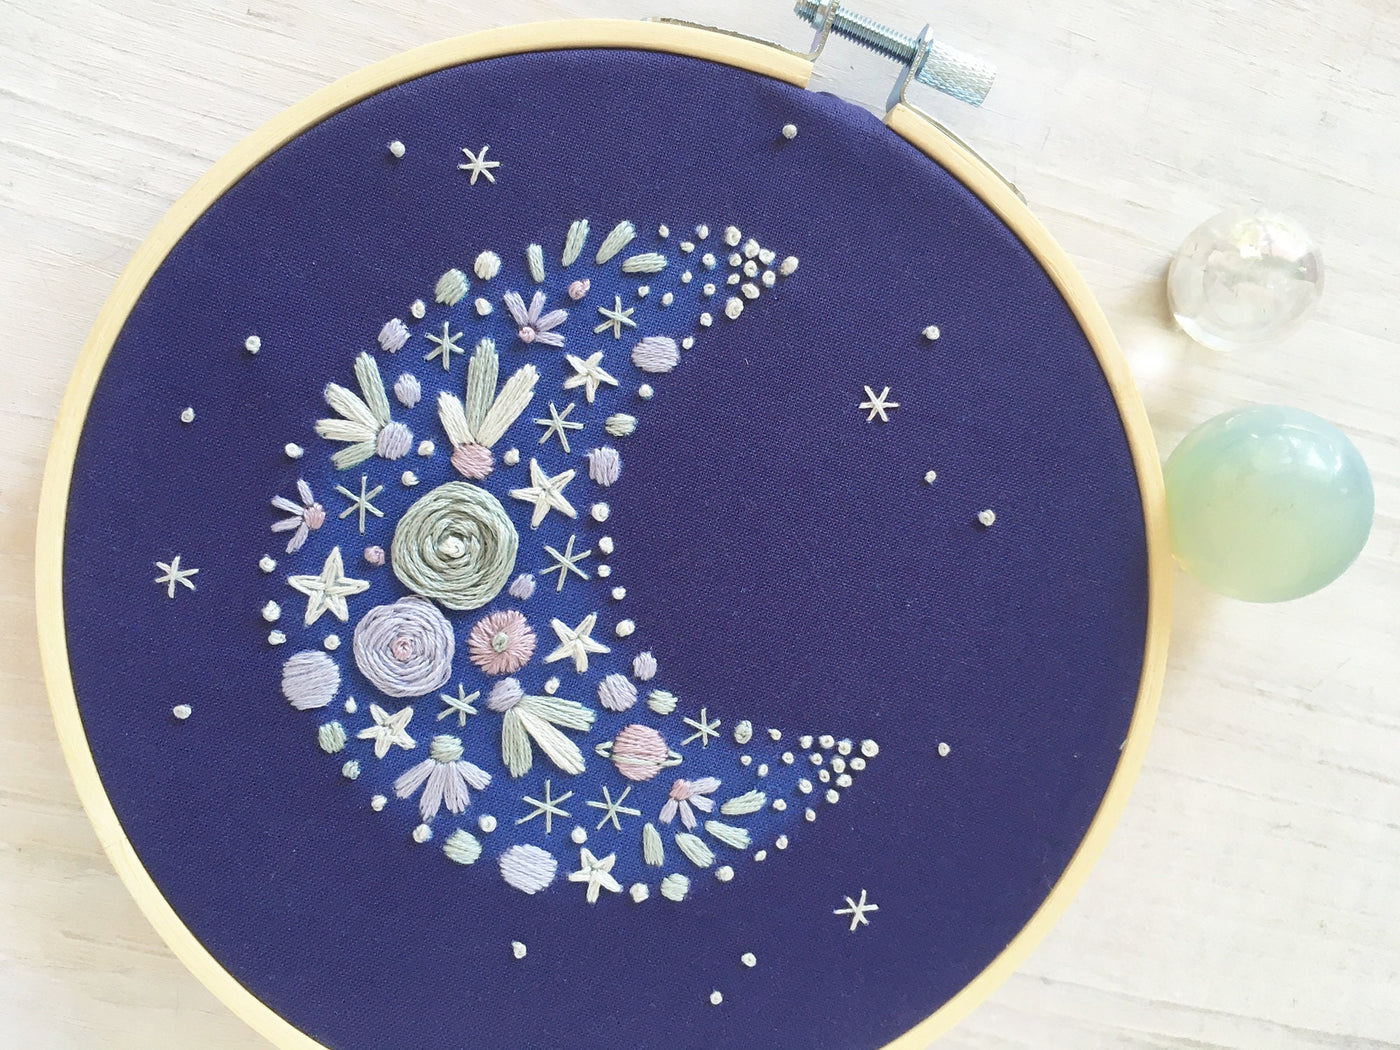 Floral Crescent Moon Hand Embroidery Sampler